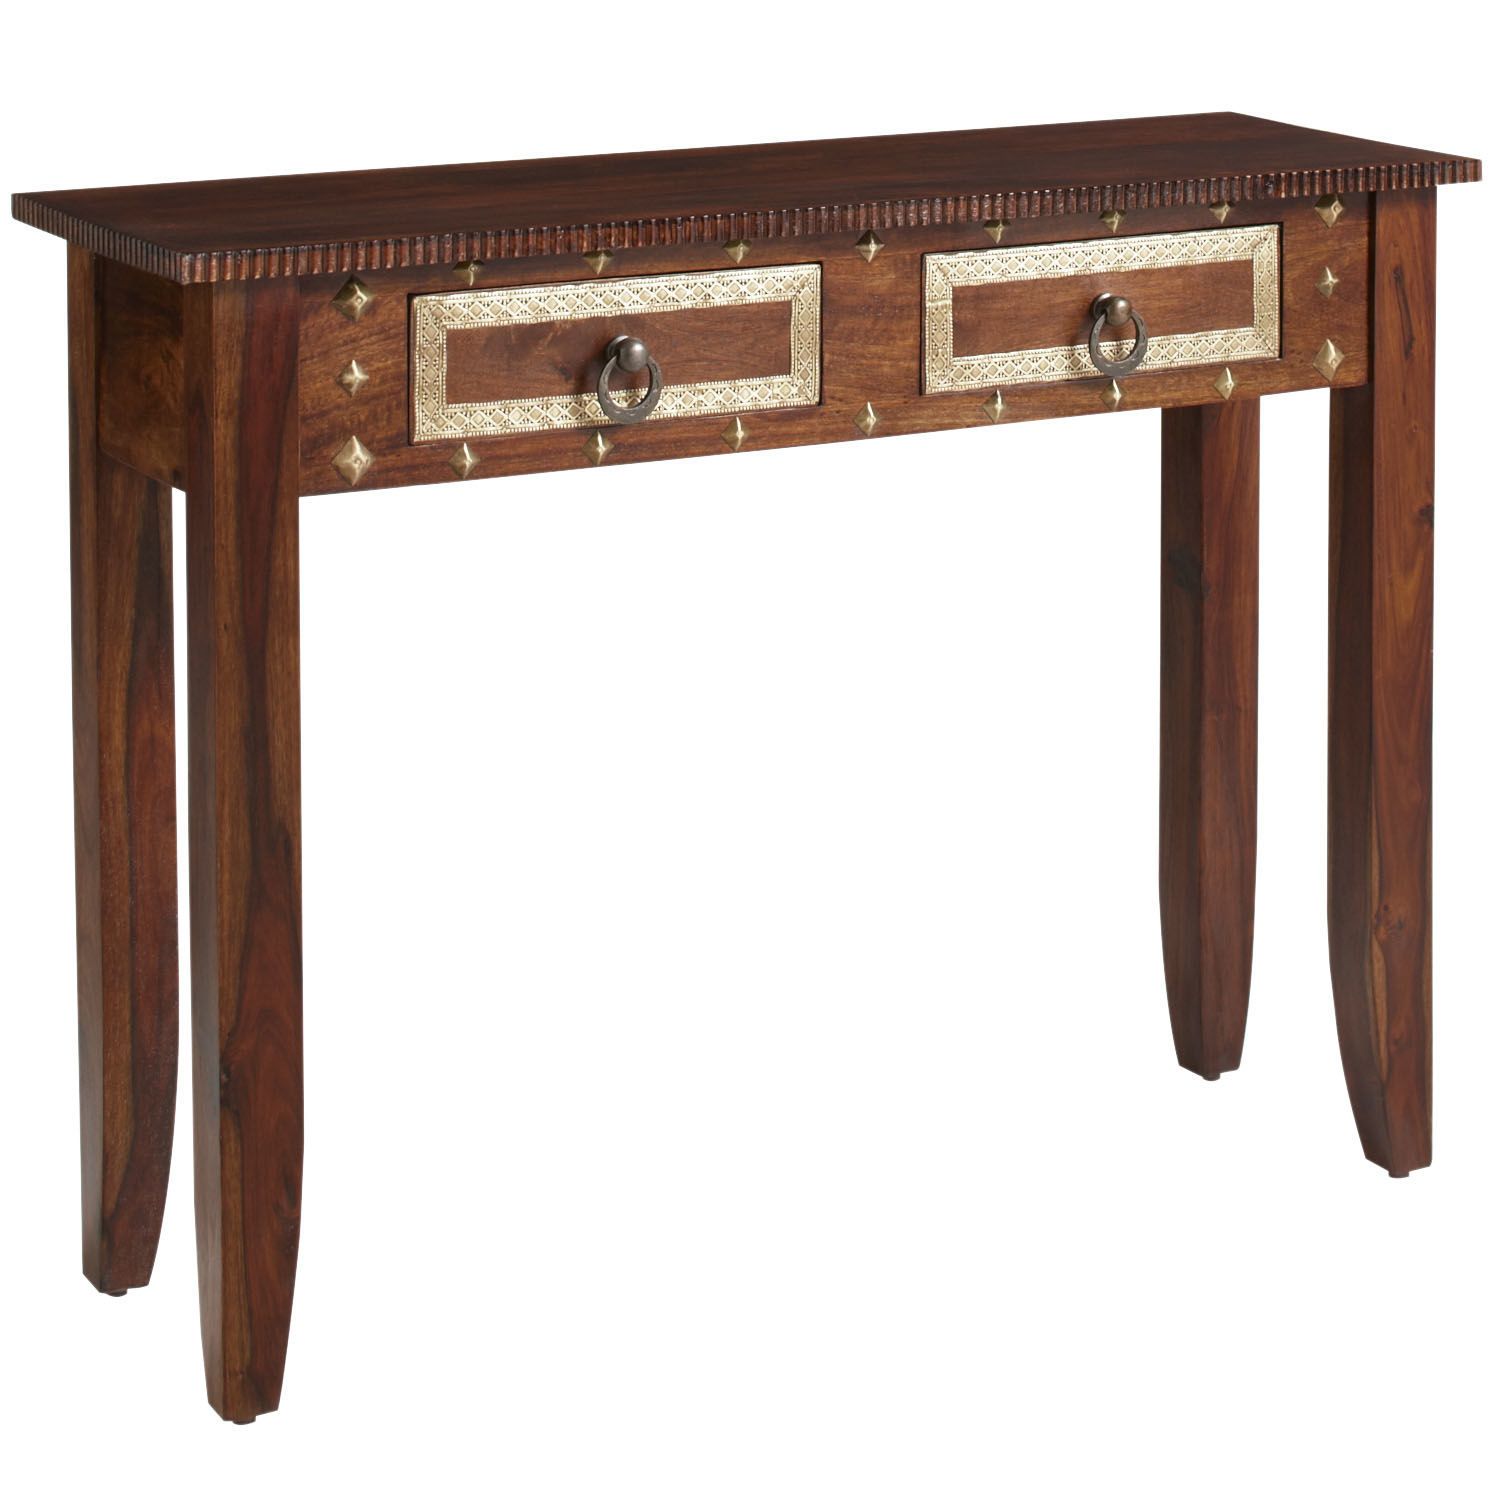 heera console table ideas for the house keru accent pier imports brass nest tables cherry ethan allen dining expandable outdoor applique runner pottery barn long pulaski